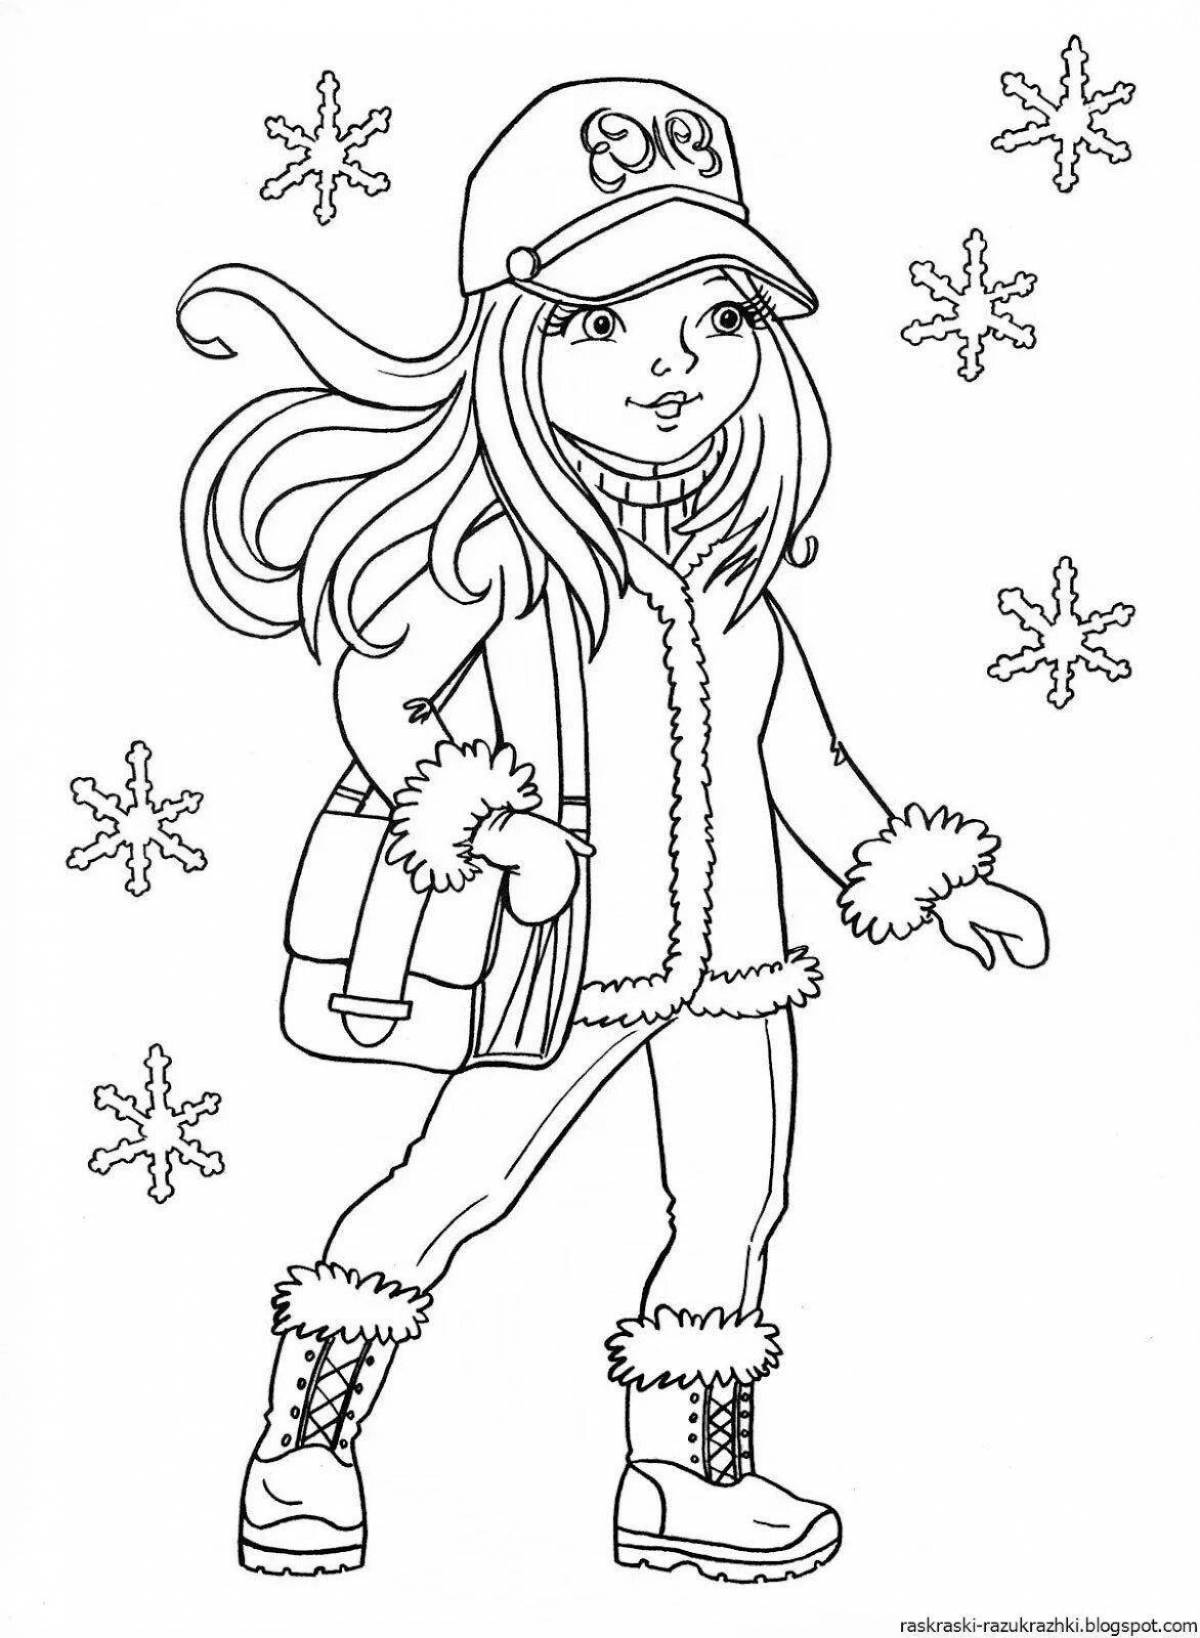 Funny coloring pictures for girls 12 years old